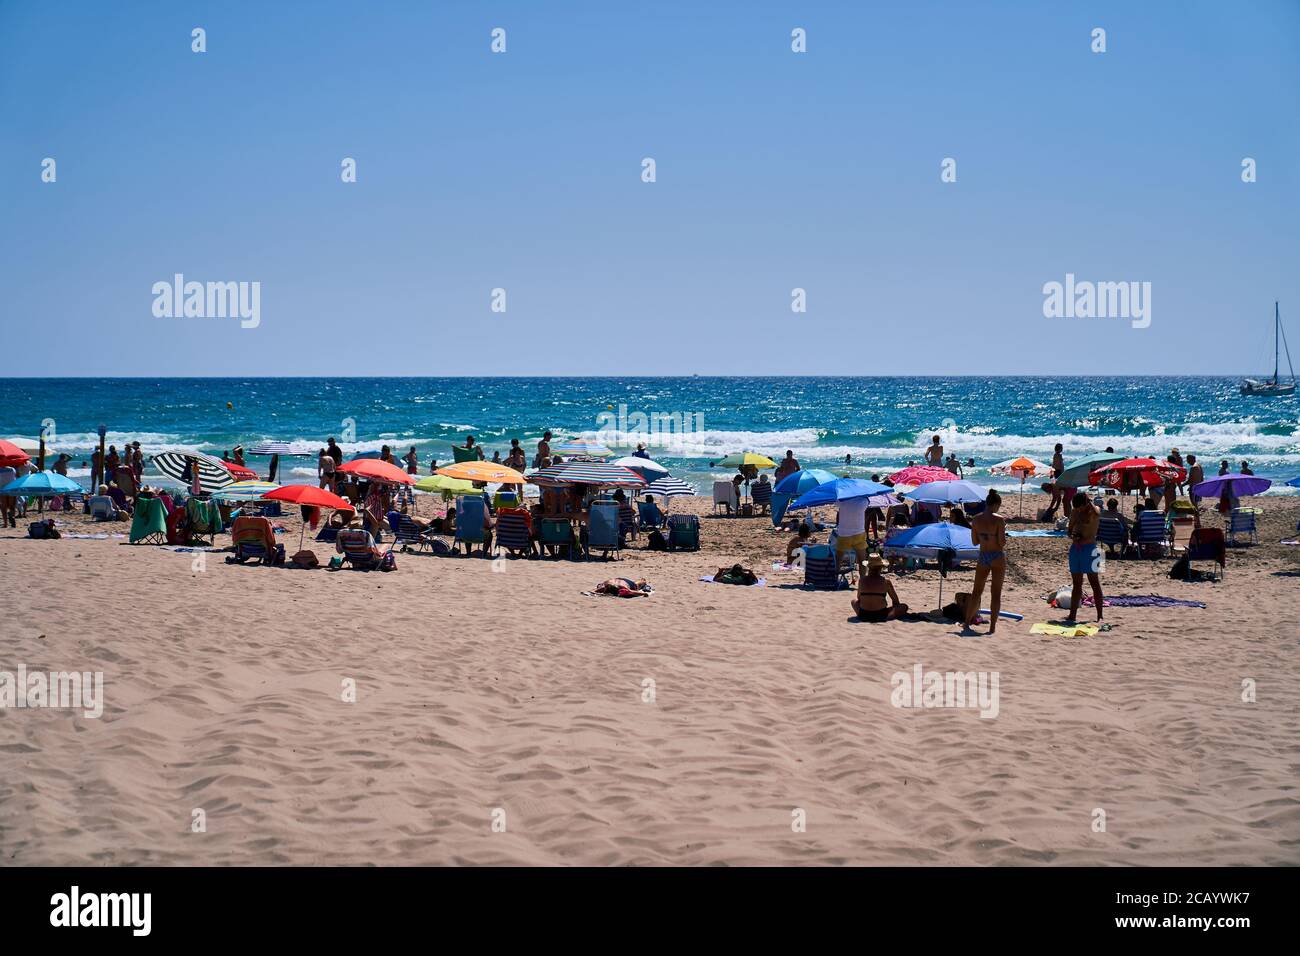 Sunseekers gathered with sunloungers and parasols, San Juan beach Alicante, Spain, Europe, July 2020 Stock Photo